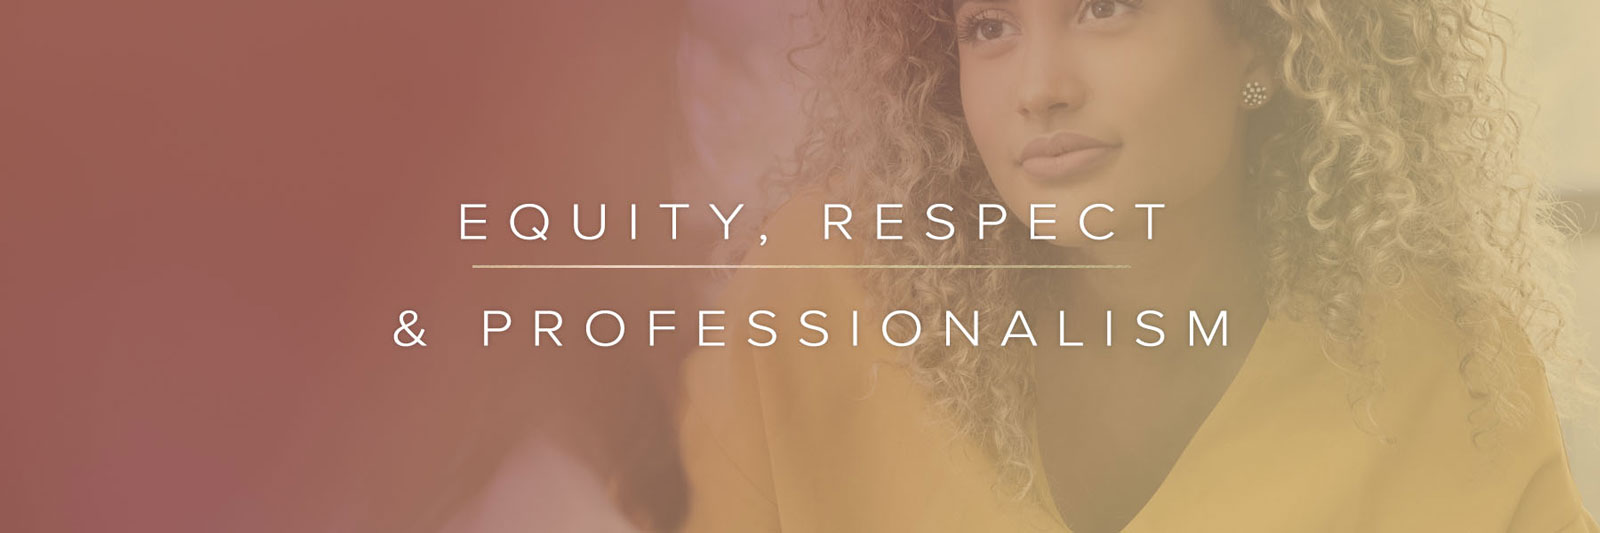 equity, respect and professionalism